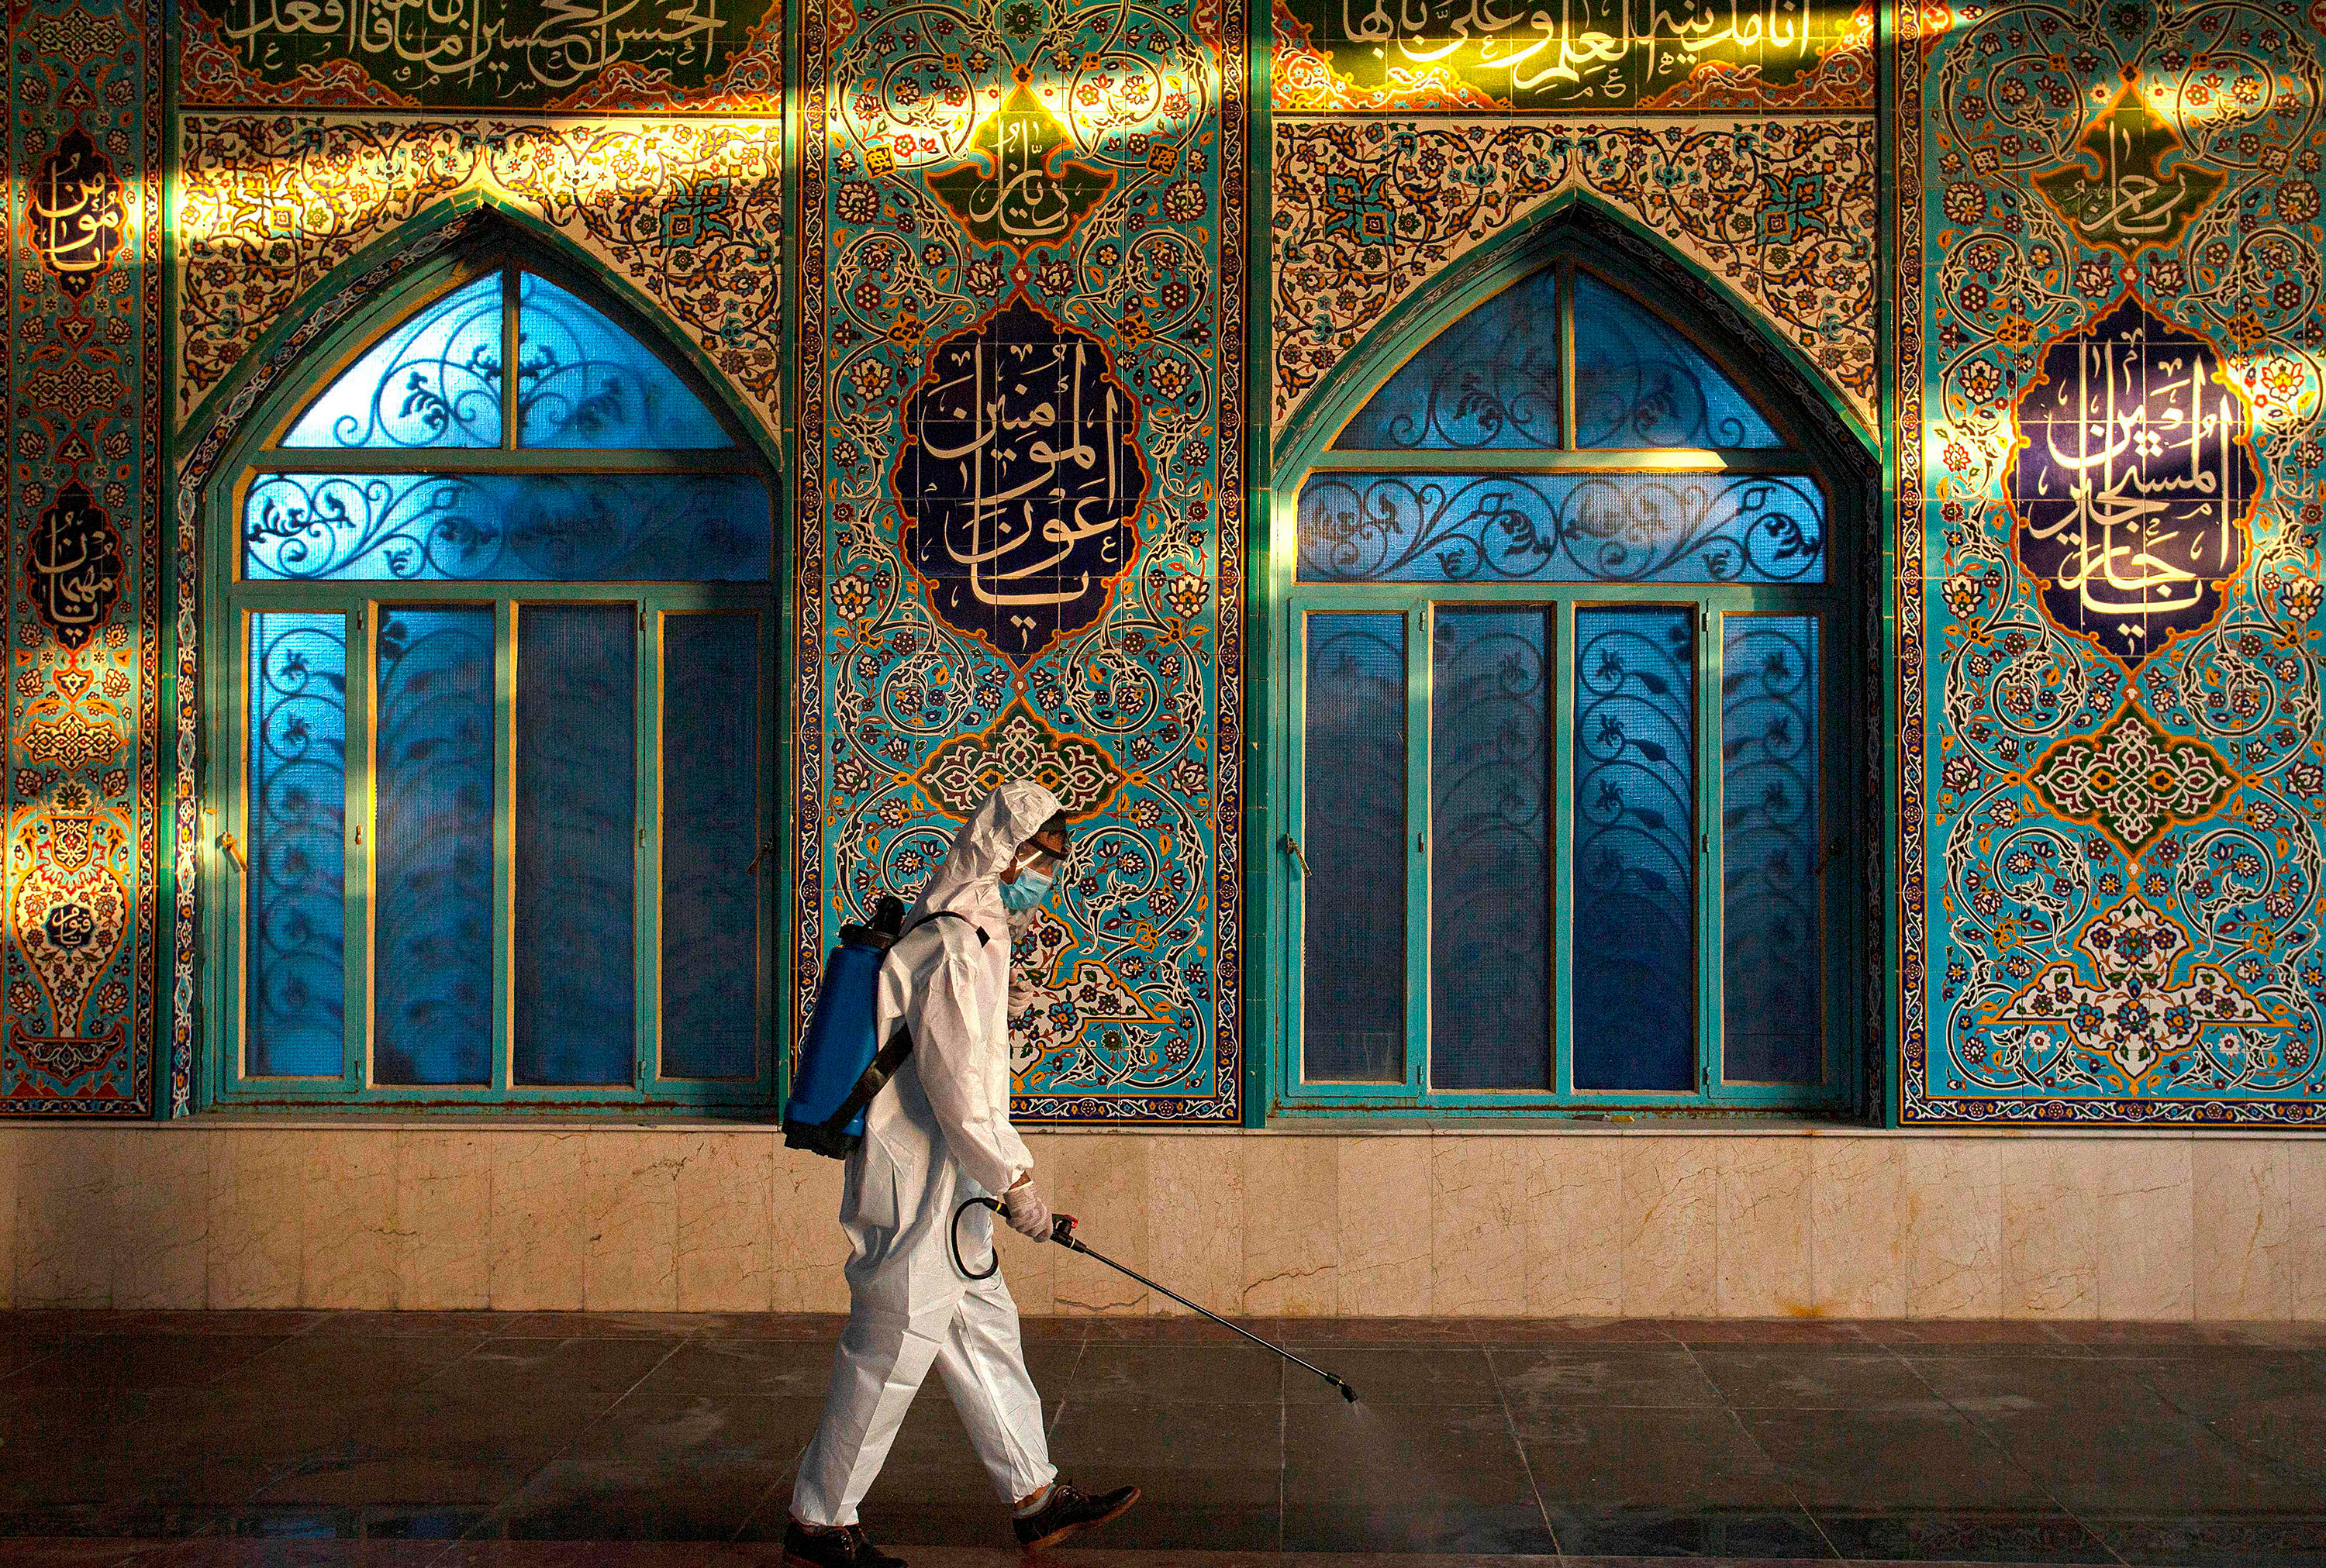 A worker disinfects a mosque on August 20, 2020 in Basra, Iraq